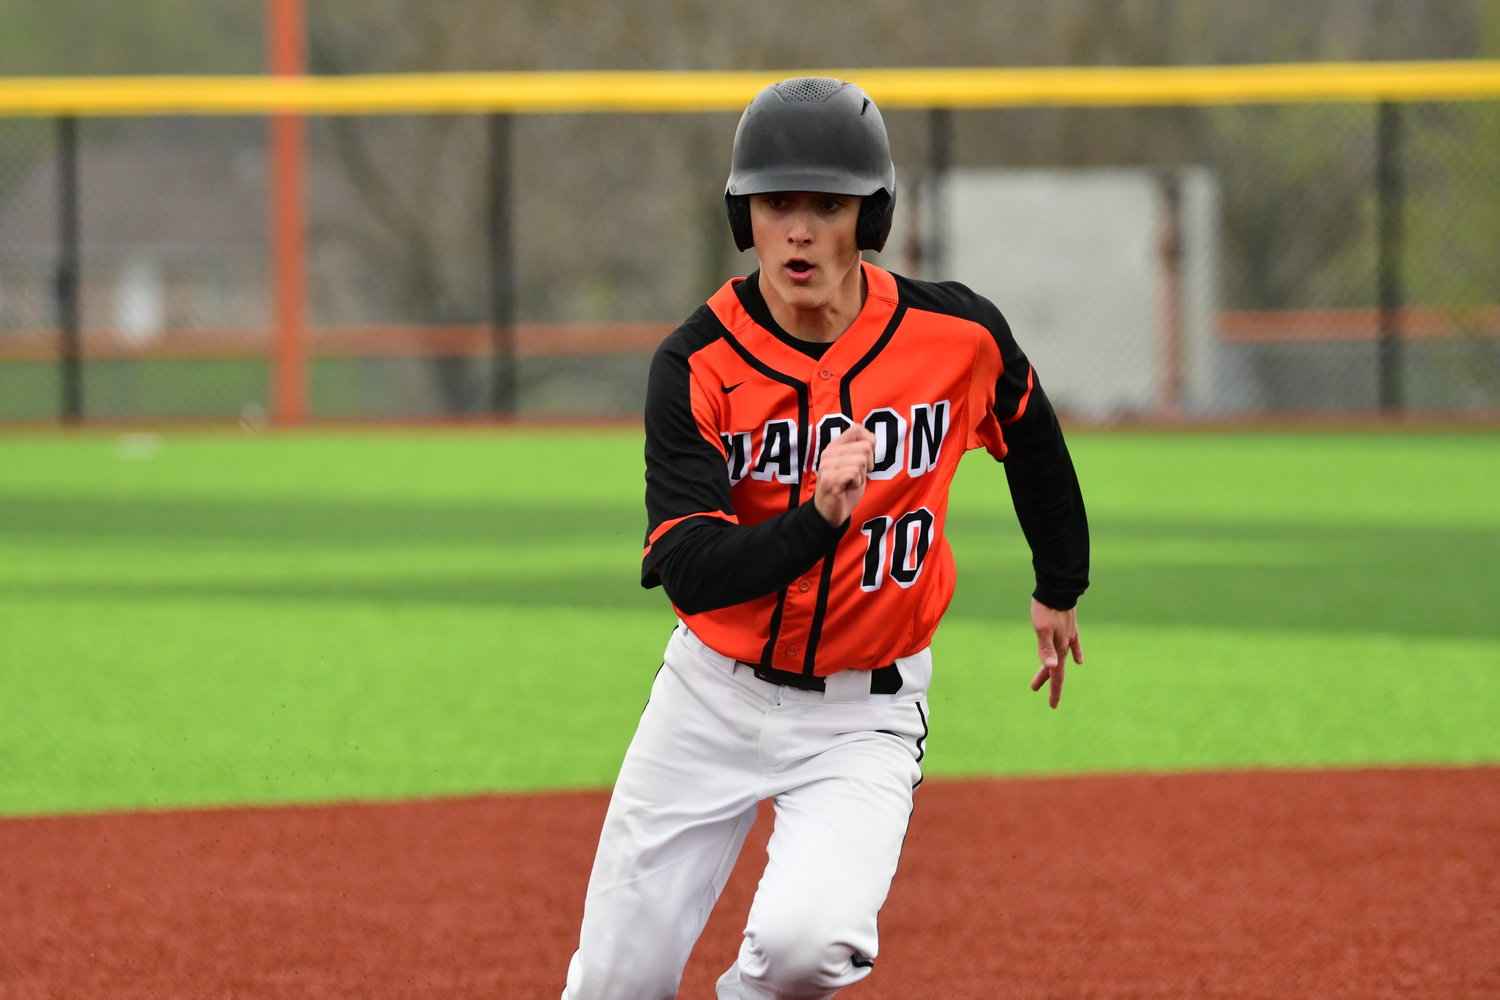 Photos from a 2-0 win for Macon against Putnam County on Friday, April 29, 2022. It was the first game at Macon's new turf field.